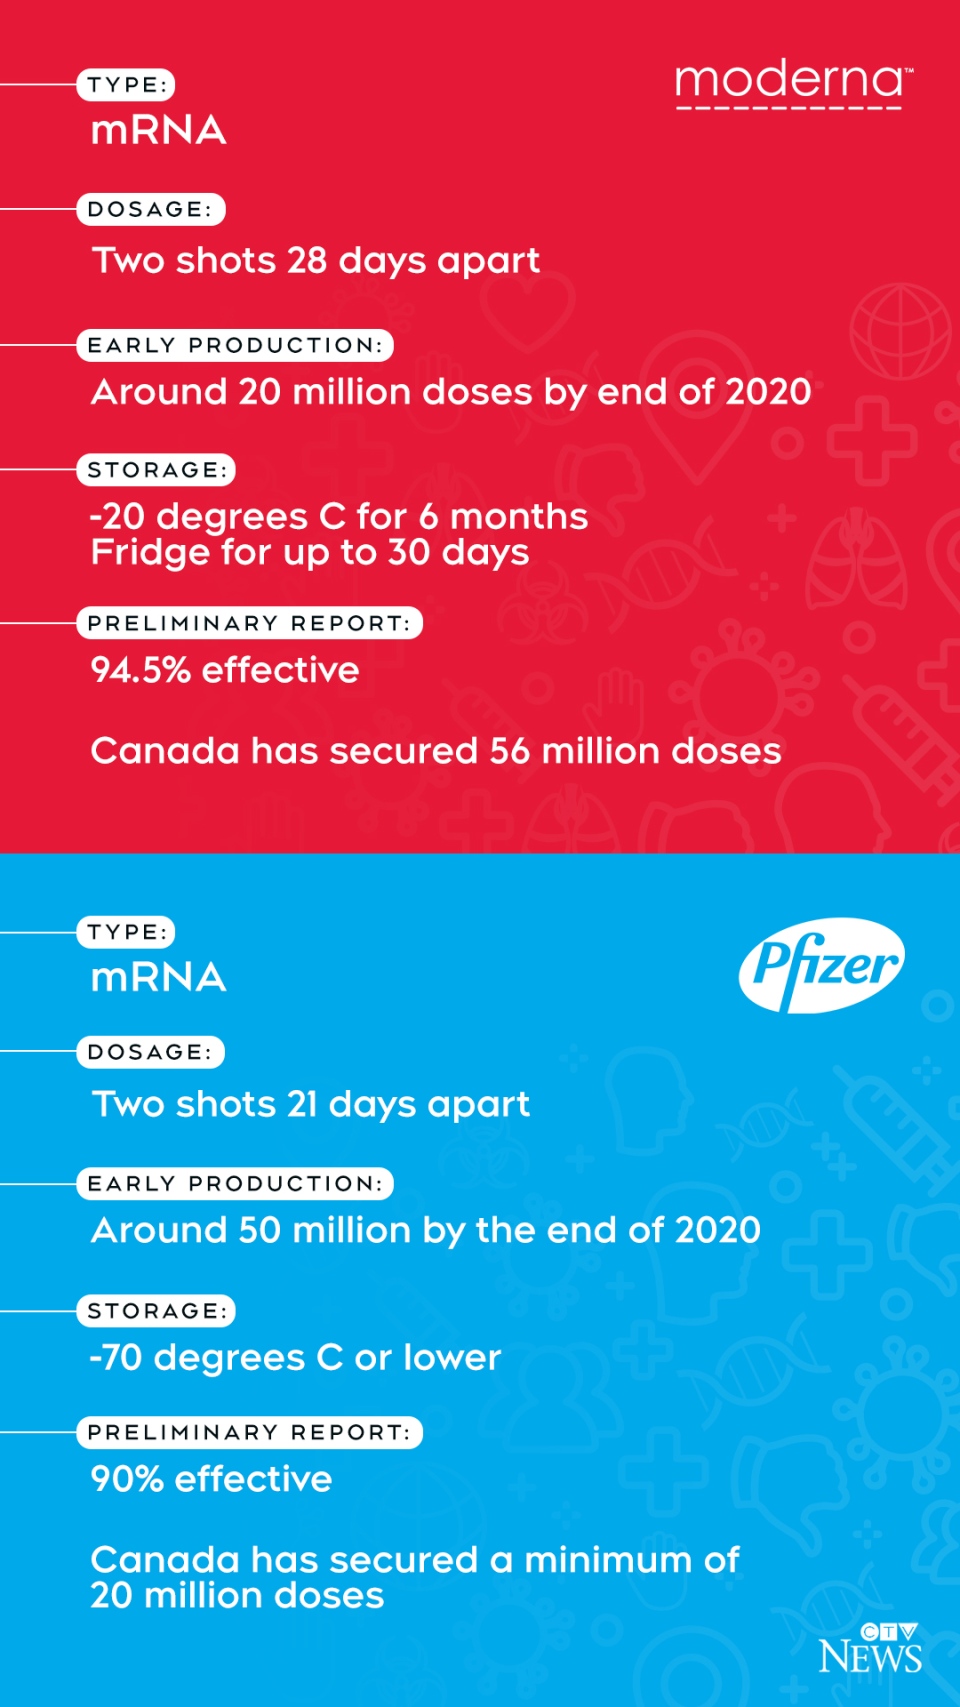 Comparing the Moderna and Pfizer vaccines